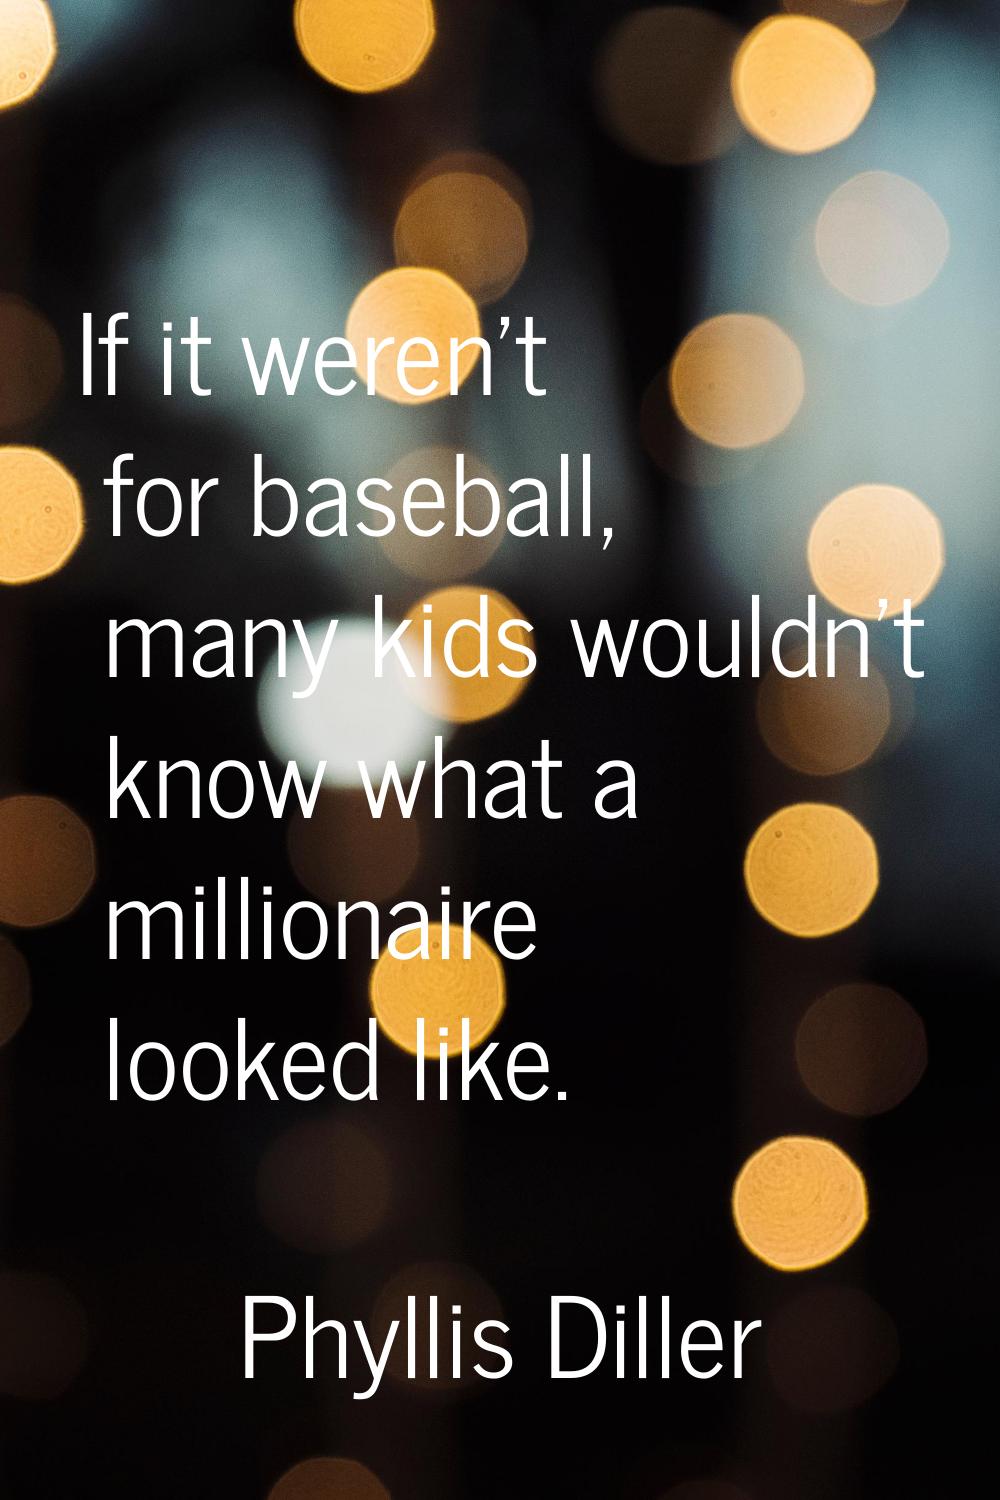 If it weren't for baseball, many kids wouldn't know what a millionaire looked like.